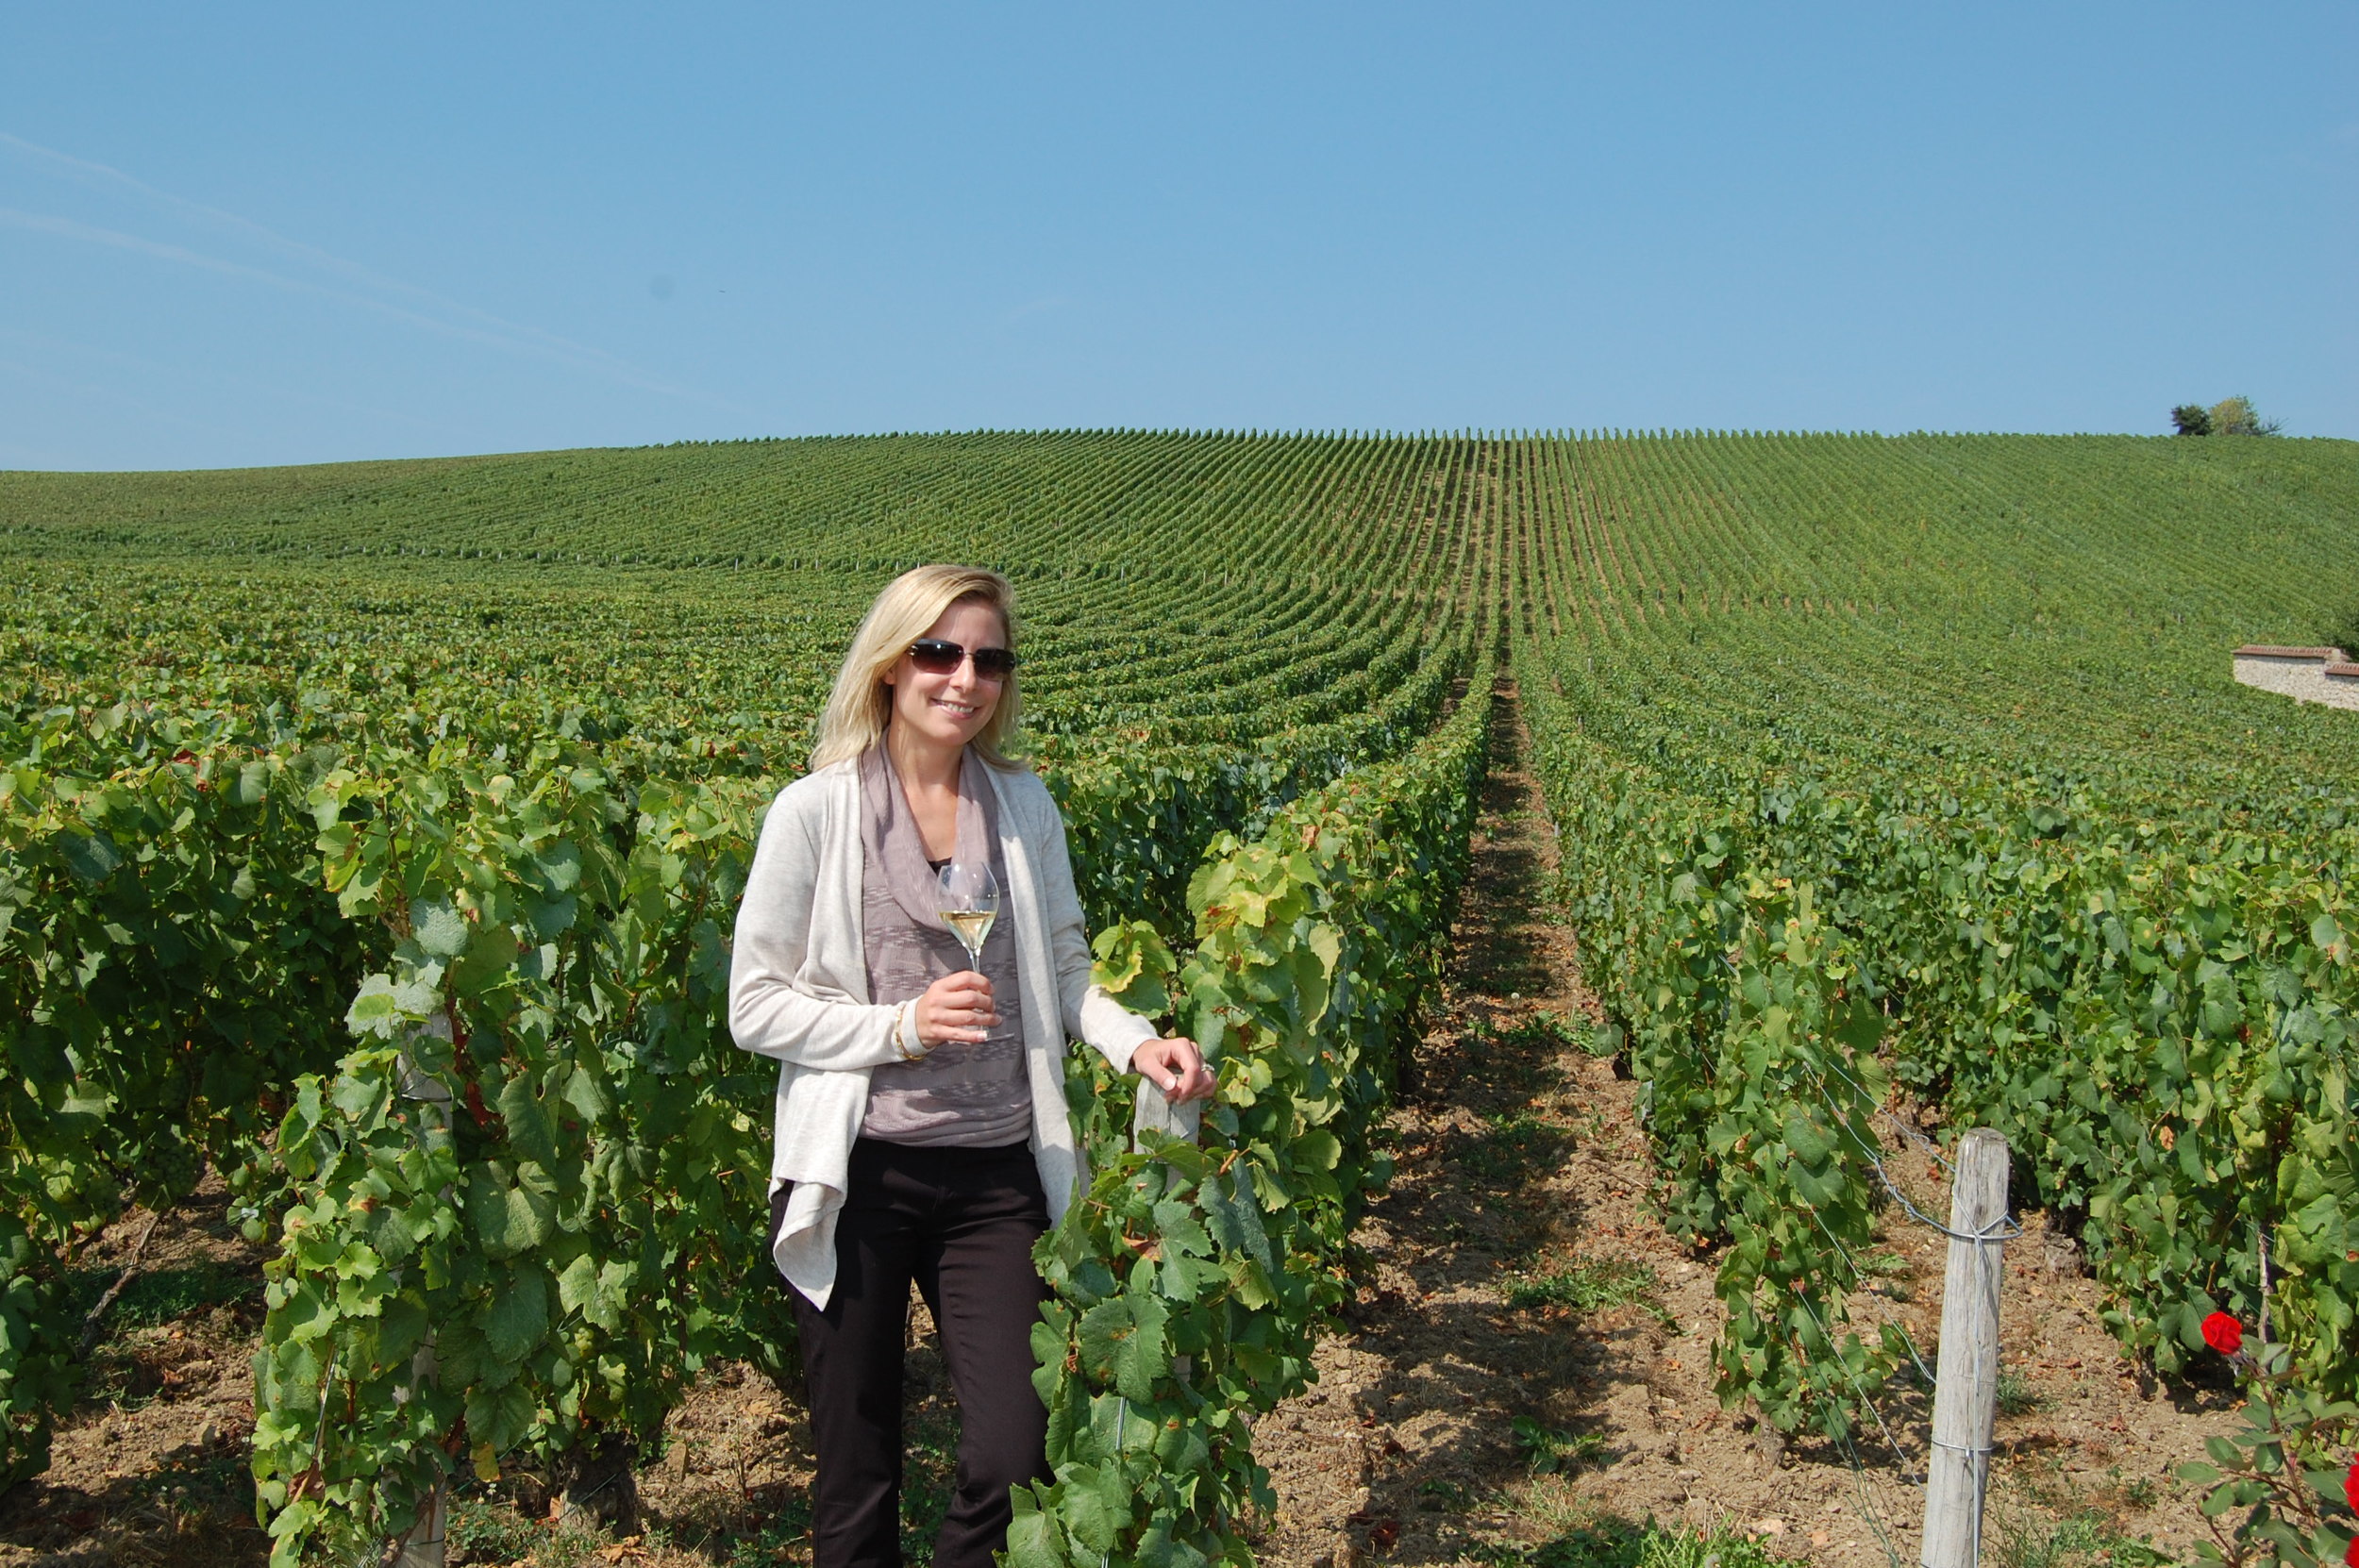 Sipping Comtes de Champagne in the Vineyards at Taittinger.